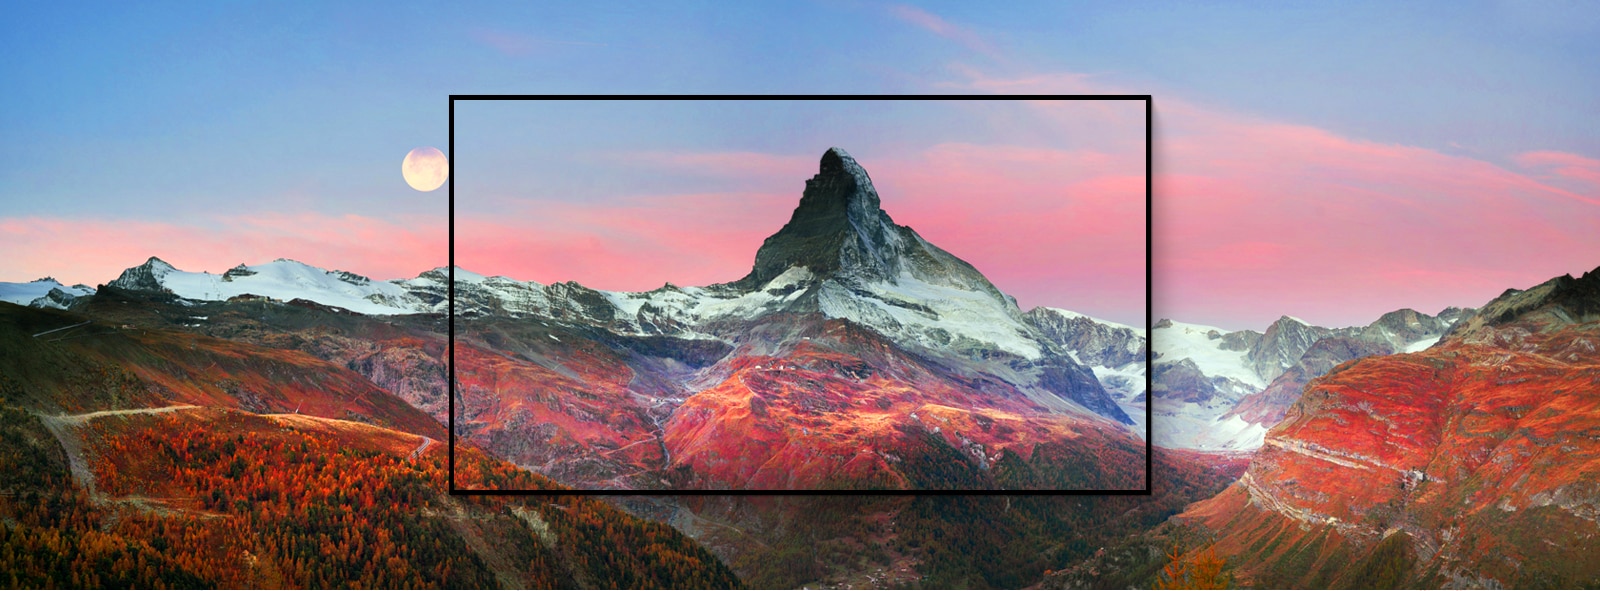 LG OLED evo frame capturing the scenery of a magnificent mountain